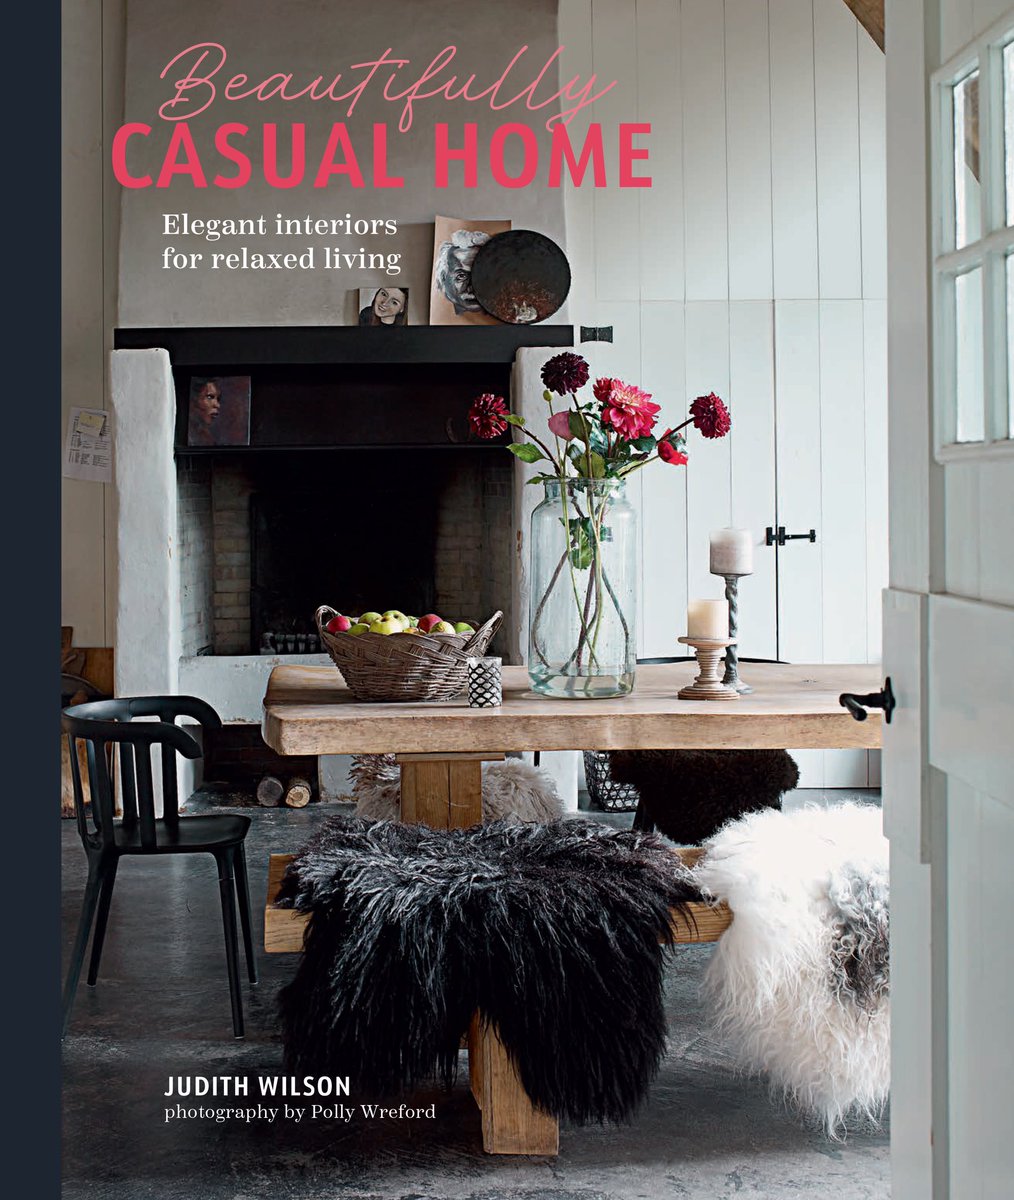 I’m excited to say that this gorgeous re-edition of my book, Beautifully Casual Home, is available to pre-order from 14 May 2024 published by @RylandPeters, featuring beautiful real homes photographed by Polly Wreford. Casual, easy style is simply the best way to live!